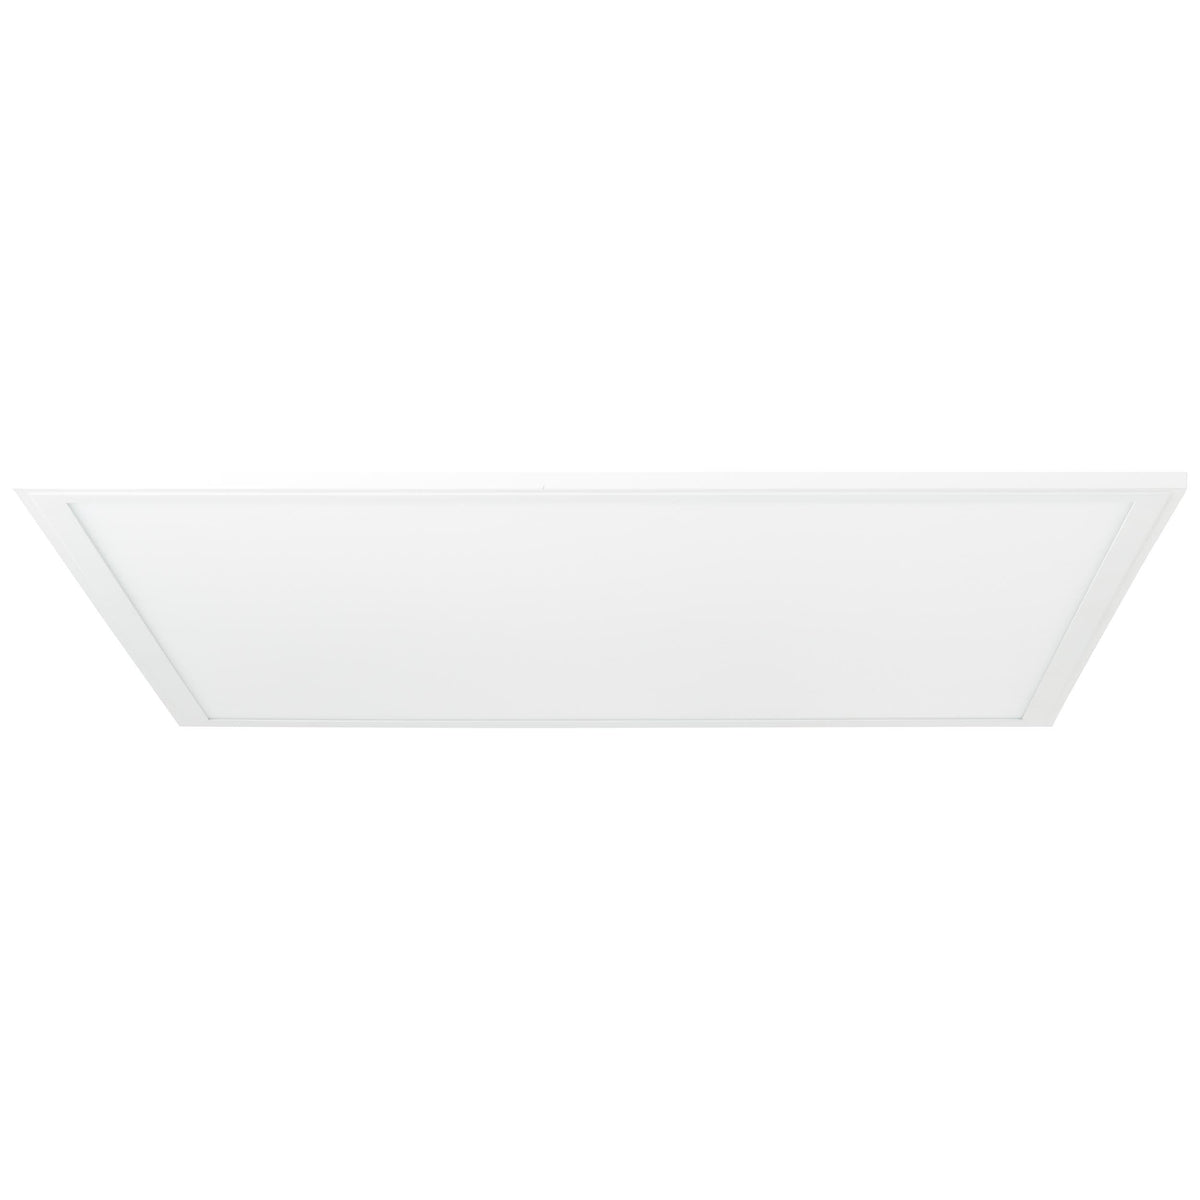 Brilliant 1 Light 40W Abie LED Square Ceiling Panel - White | G90319/05 from DID Electrical - guaranteed Irish, guaranteed quality service. (6977602846908)